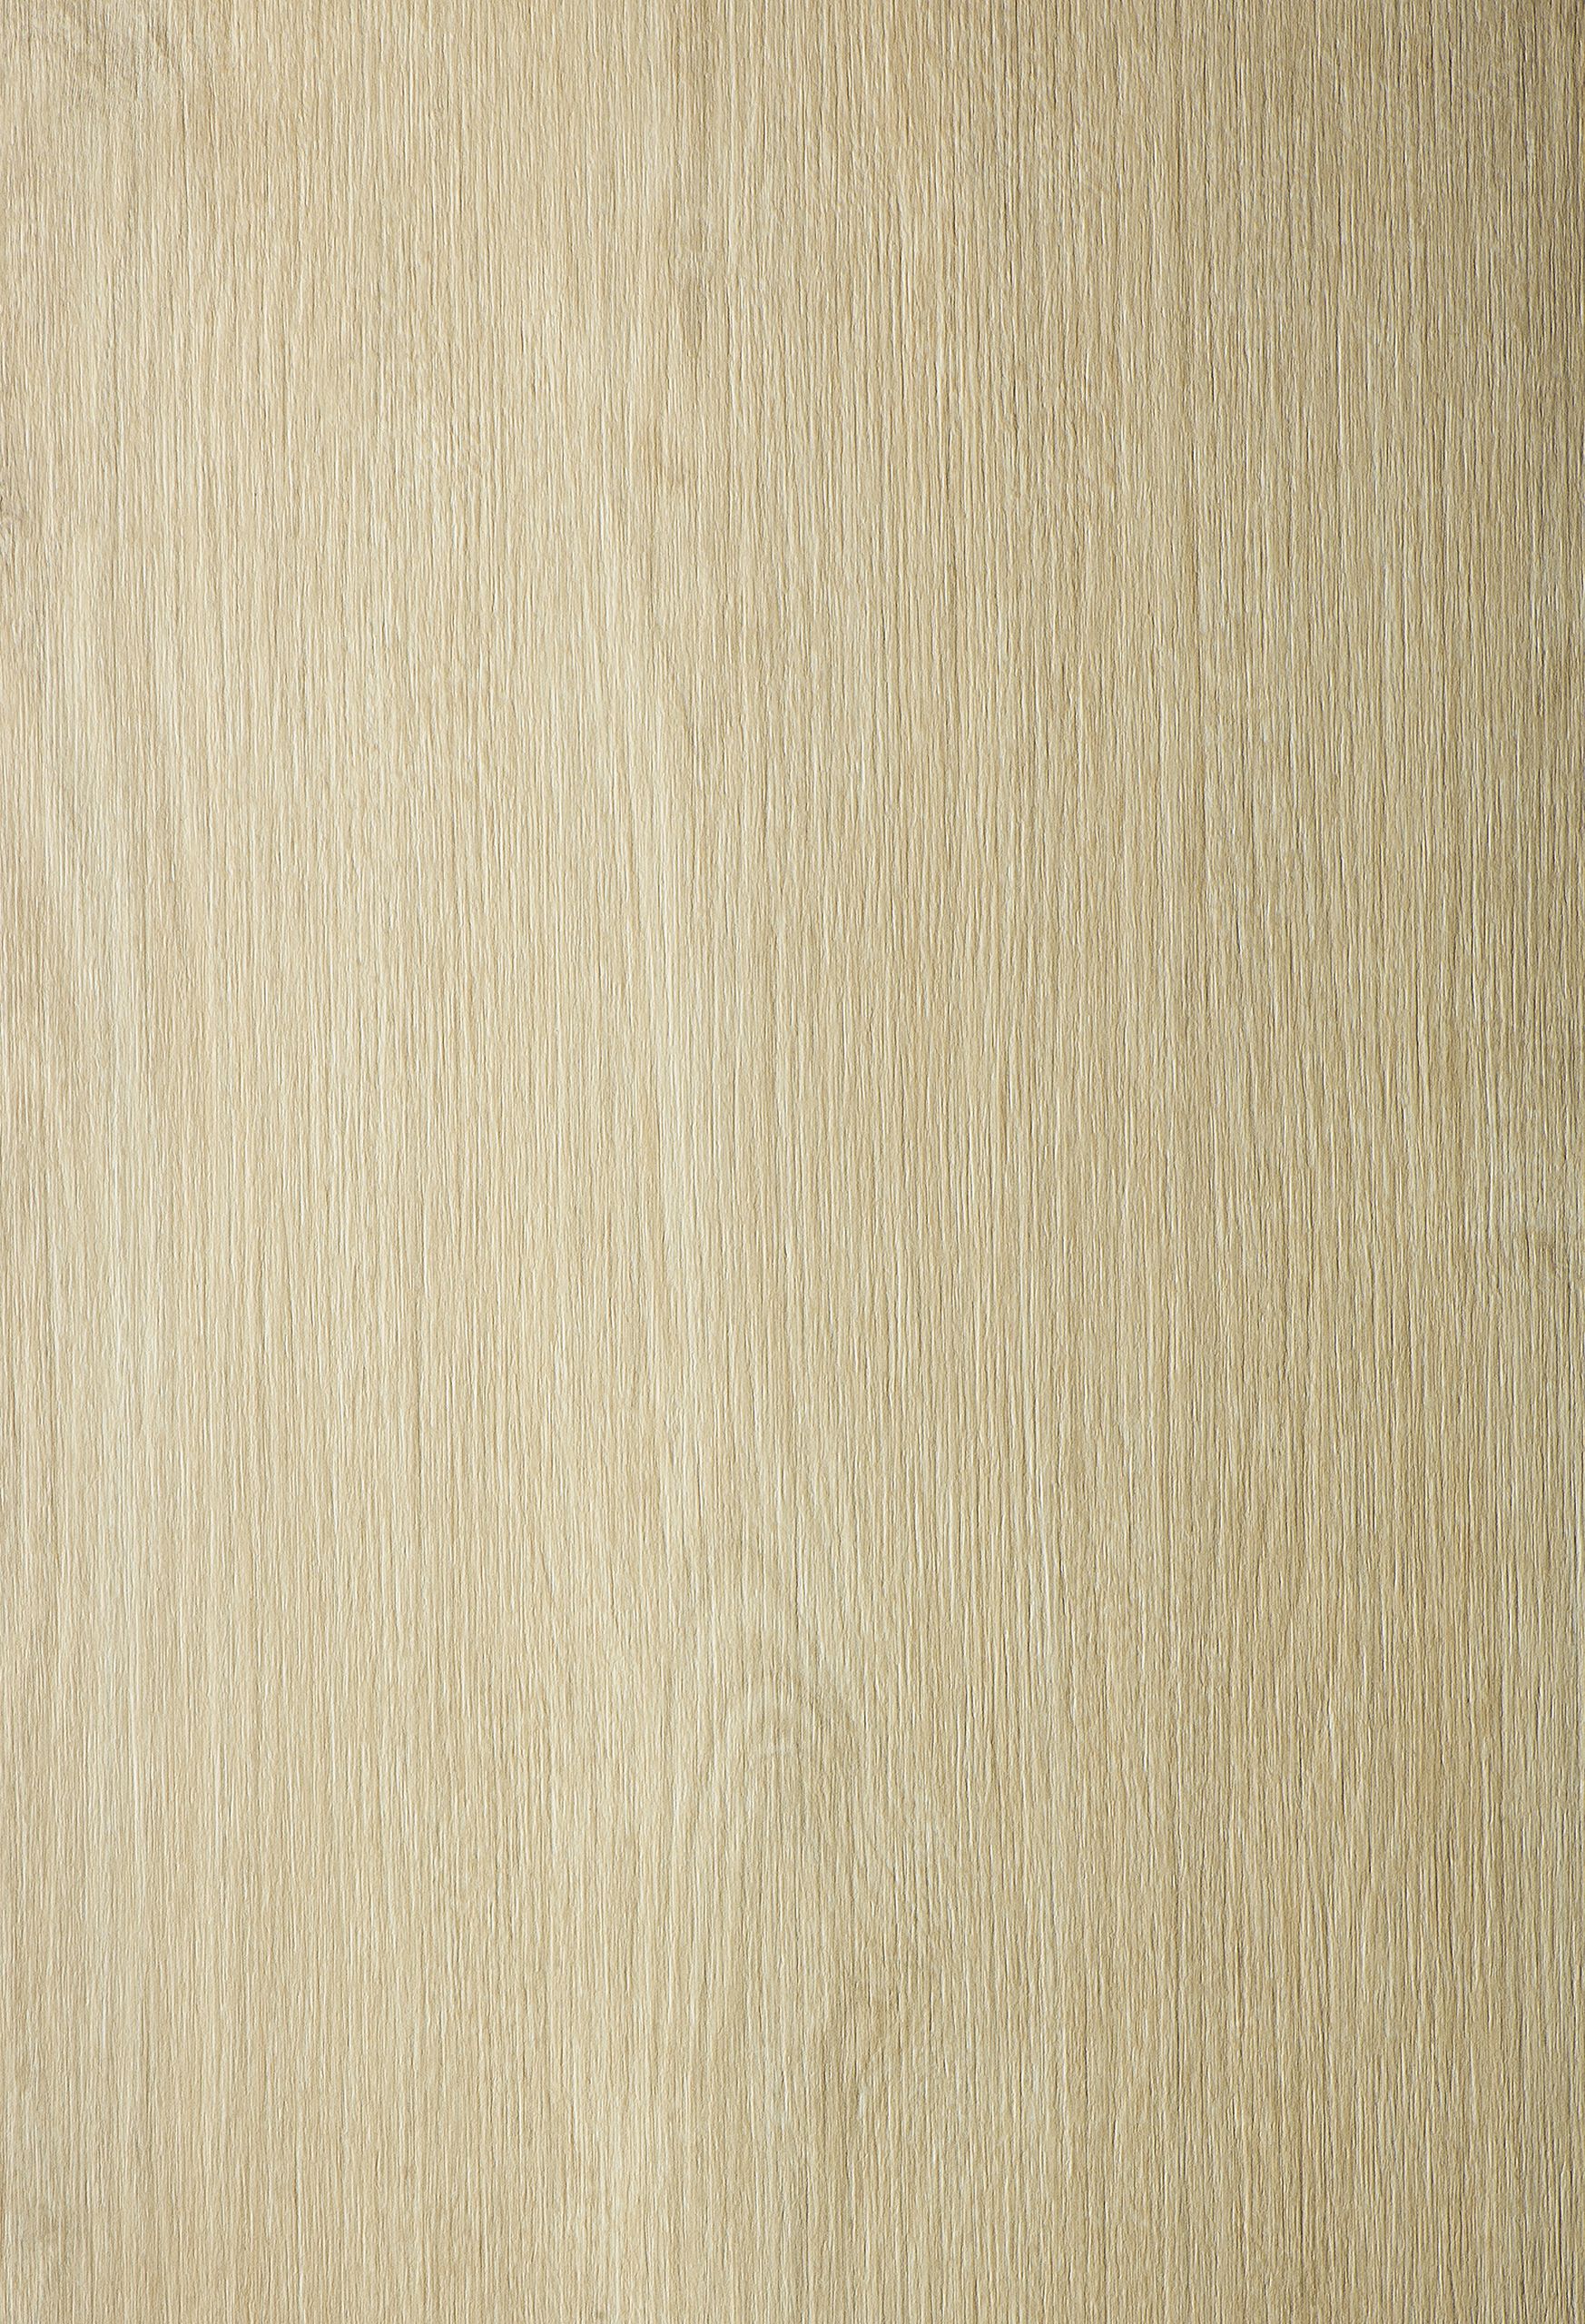 https://xyliki.gr/wp-content/uploads/2020/05/CH3031_rovere-dolomite_root.jpg